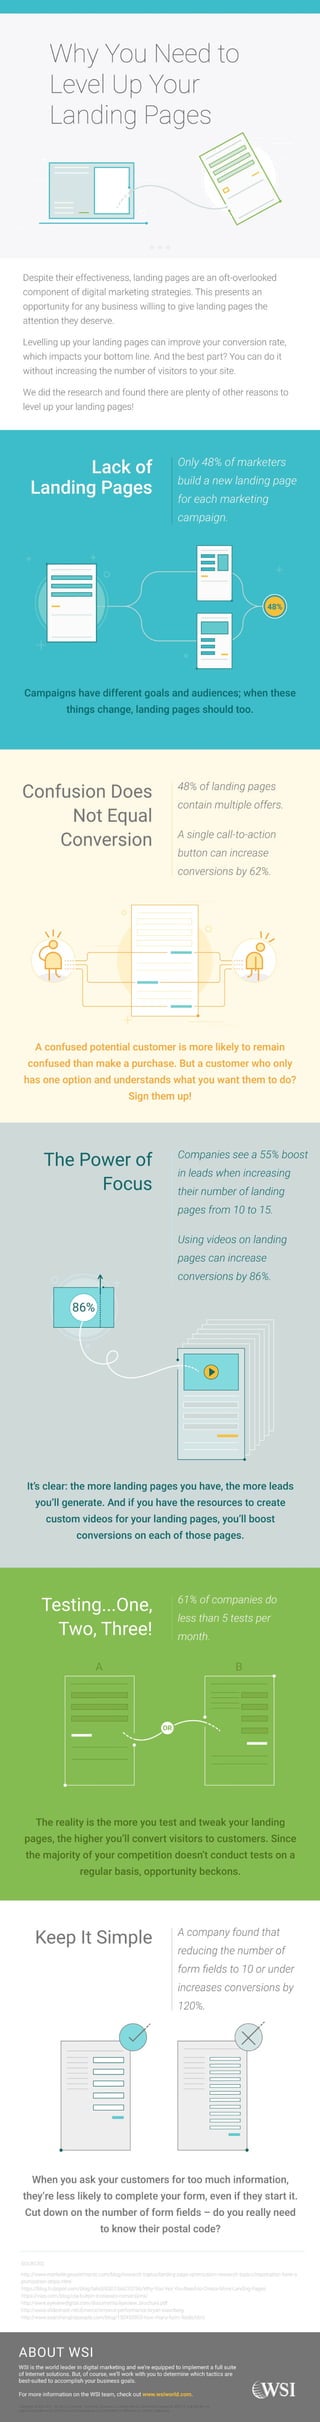 Landing Page Success... The underused Digital Marketing tactic 